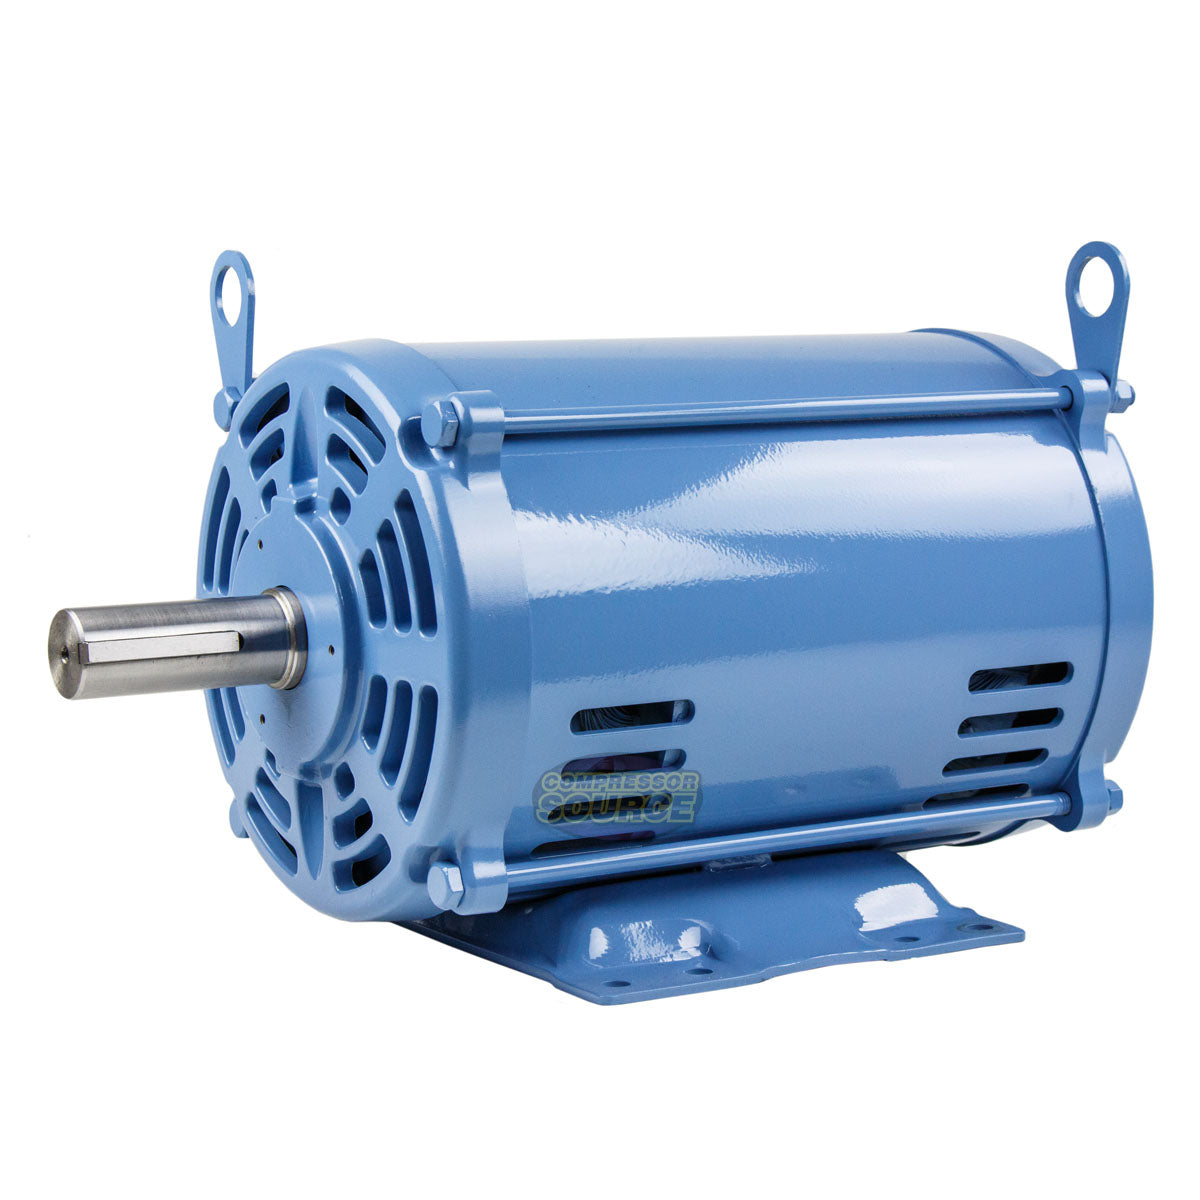 7.5 HP 3 Phase Electric Motor 1800 RPM 213T Frame ODP Open Drip Proof 230/460V